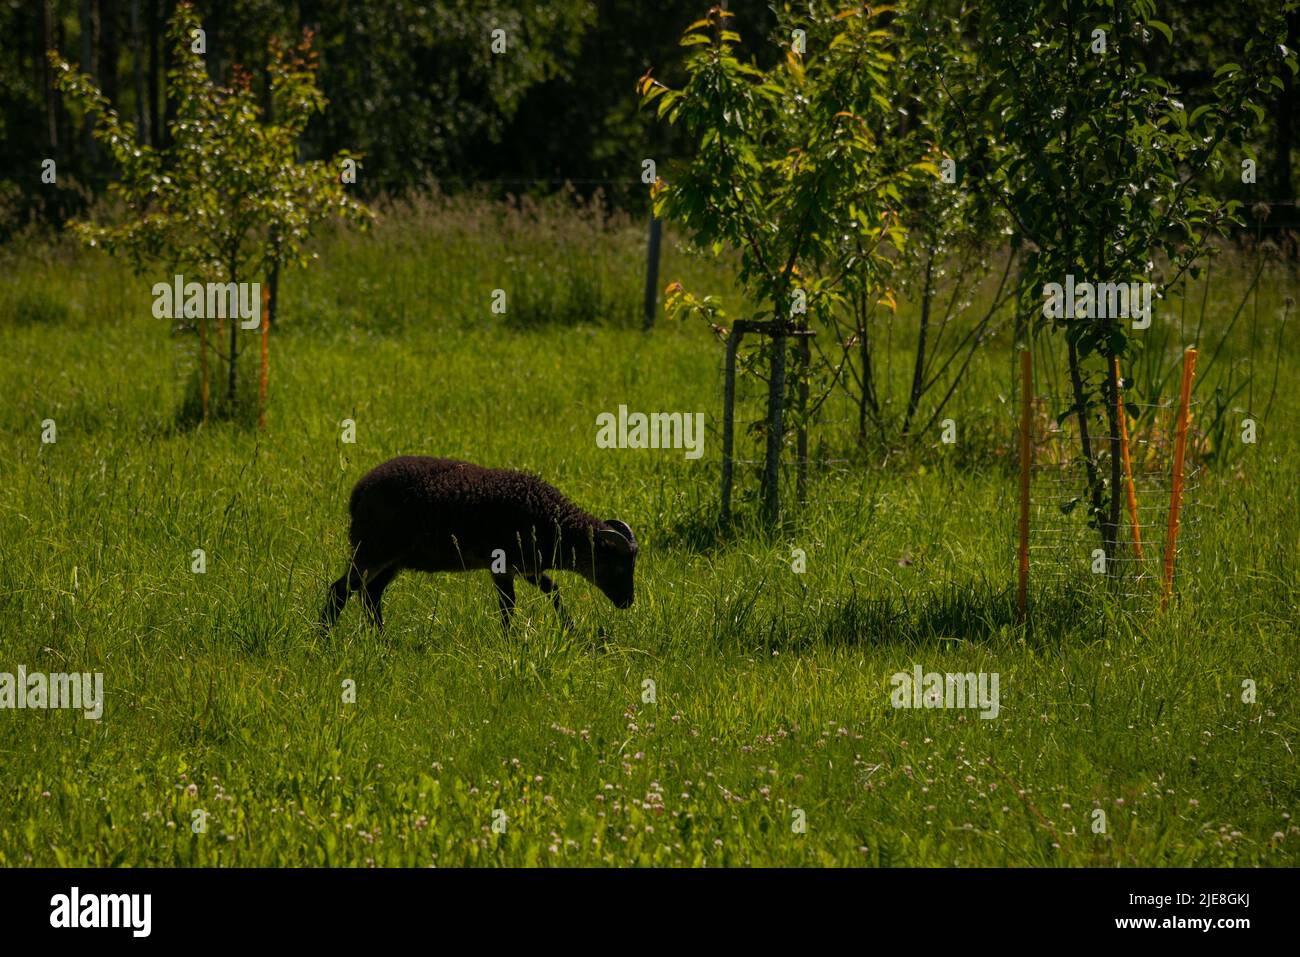 black goat with horns grazes in a green grass next to young apple trees fenced with a fence. Stock Photo